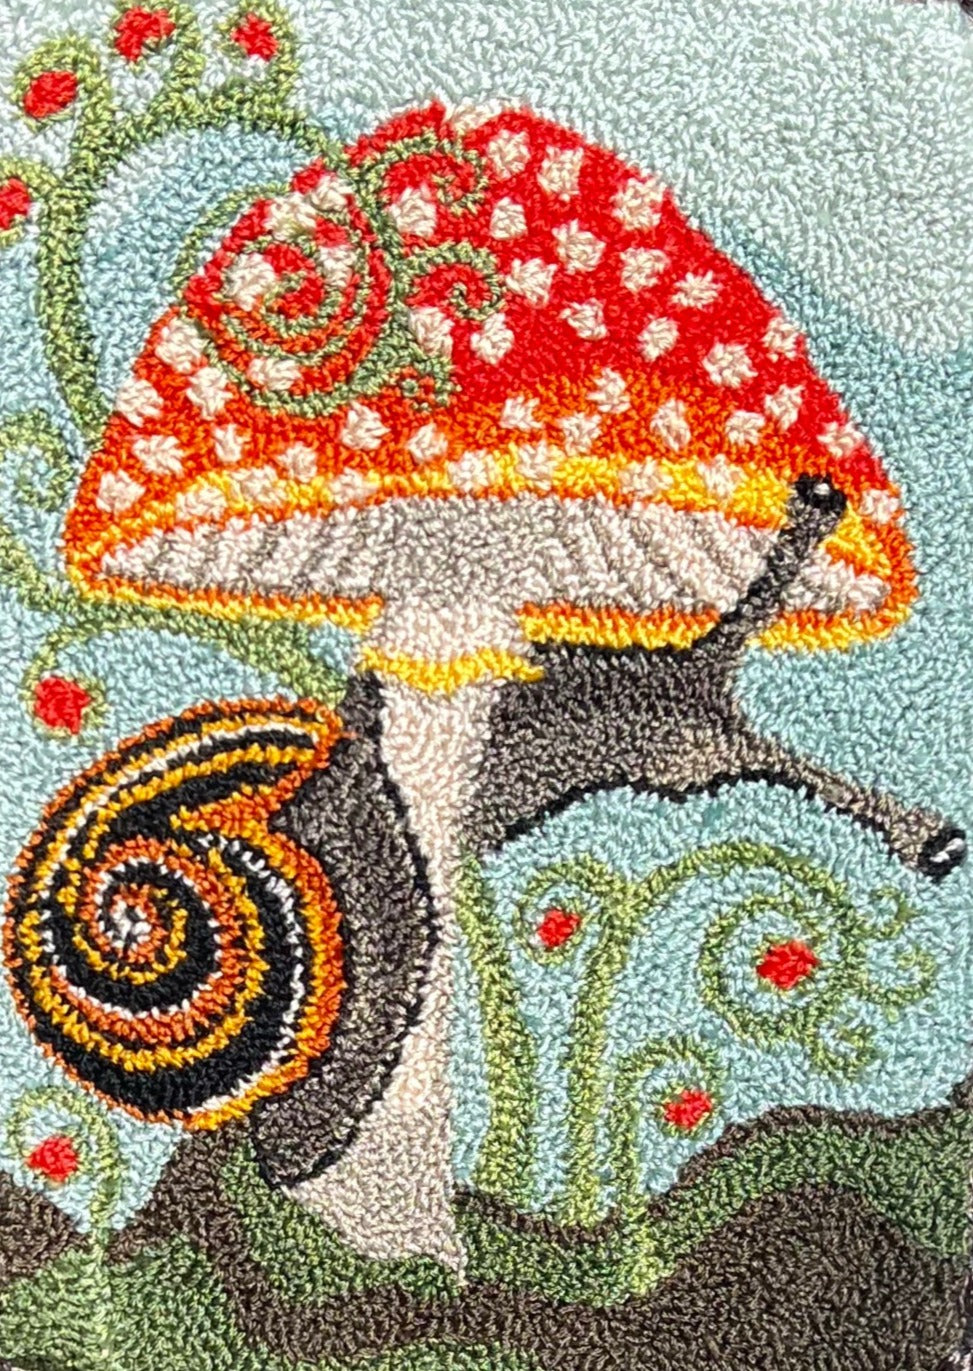 Presenting the enchanting "ENTWINED" Paper Rug Hooking Pattern by Orphaned Wool. This delightful design showcases a charming snail gracefully wrapping around a vibrant mushroom. This fabulous paper pattern offers you the opportunity to bring the wonders of nature to life and create the perfect size pattern you desire. The Entwined pattern is copyrighted 2024 Kelly Kanyok, Orphaned Wool.